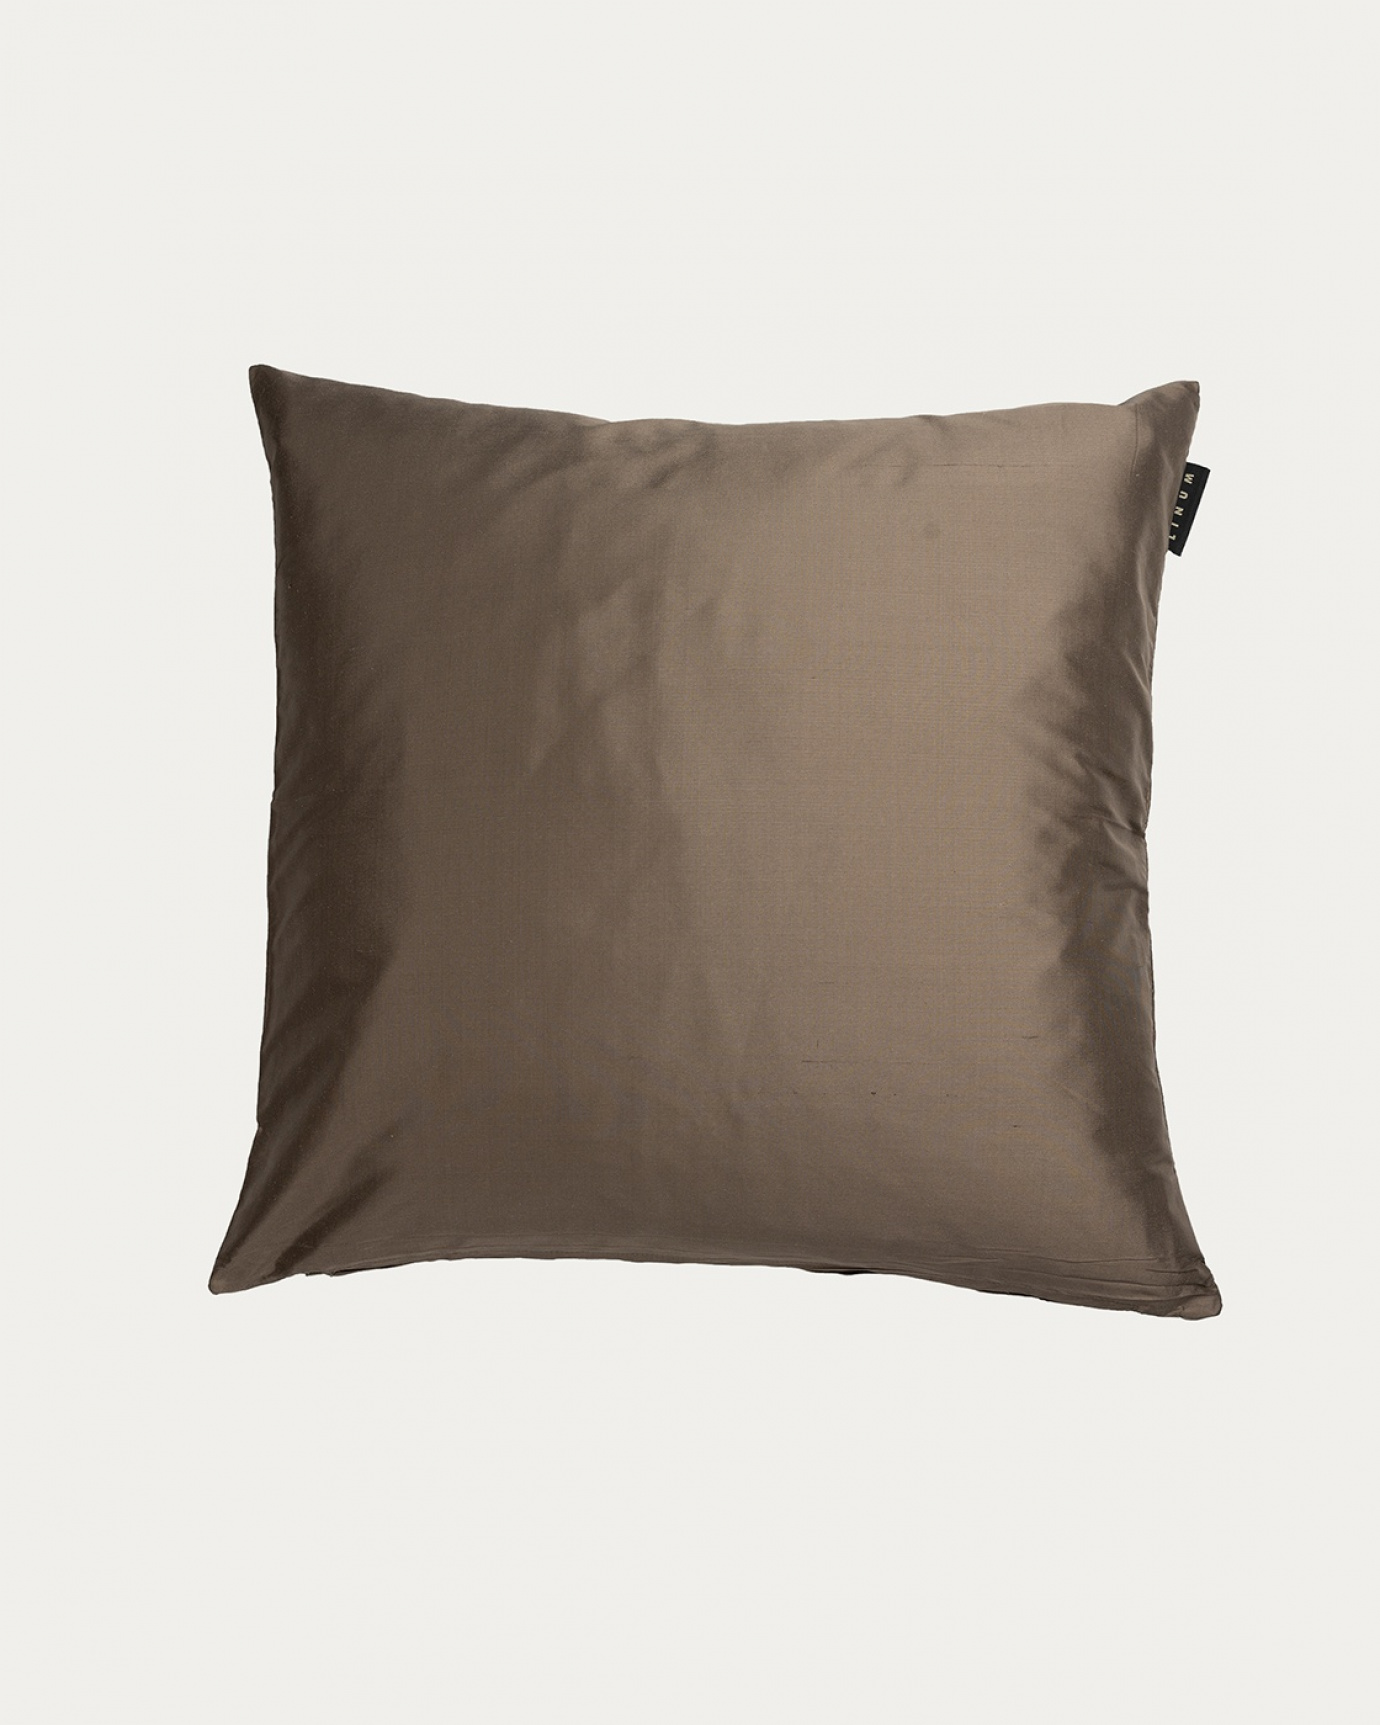 Product image dark mole brown SILK cushion cover made of 100% dupion silk that gives a nice lustre from LINUM DESIGN. Size 40x40 cm.